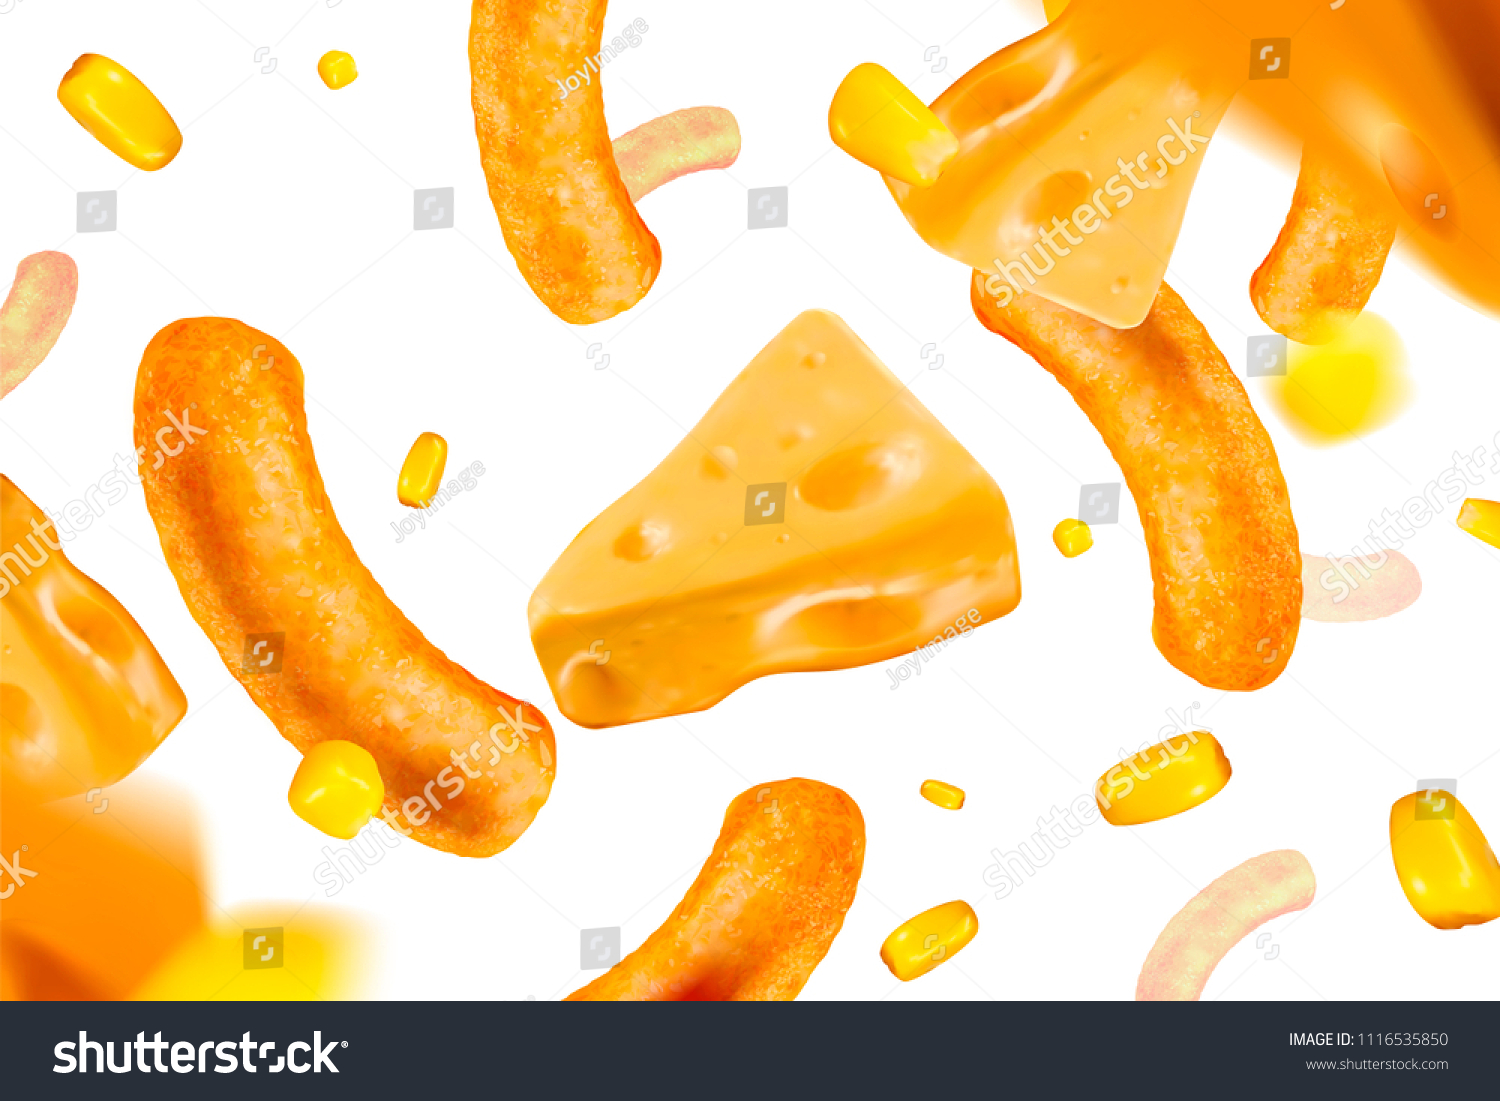 Cheese and corn curls floating in the air, 3d illustration design element #1116535850